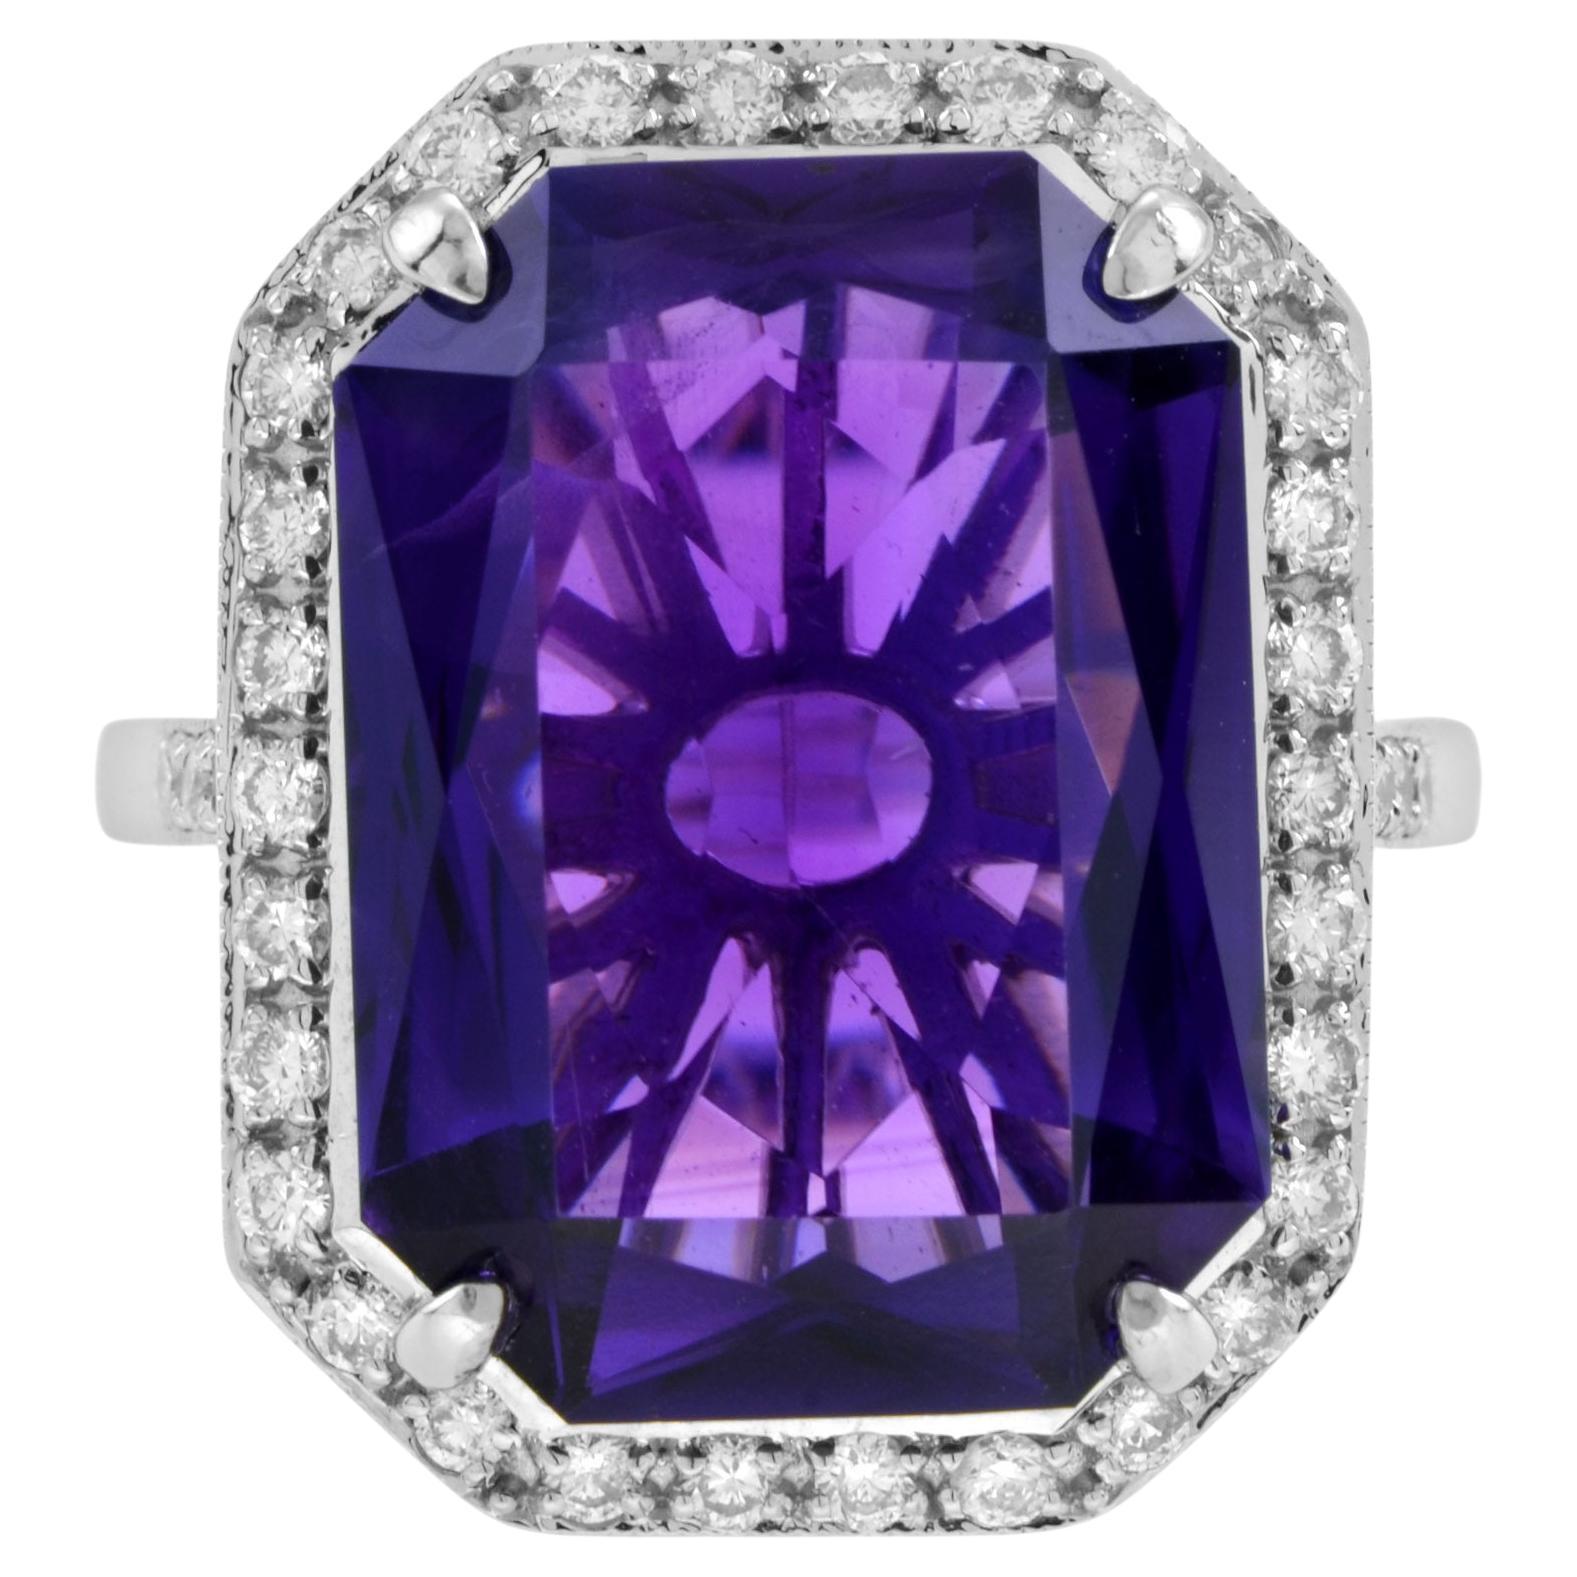 Certified 11.75 Ct. Amethyst and Diamond Halo Art Deco Style Ring in 14K Gold